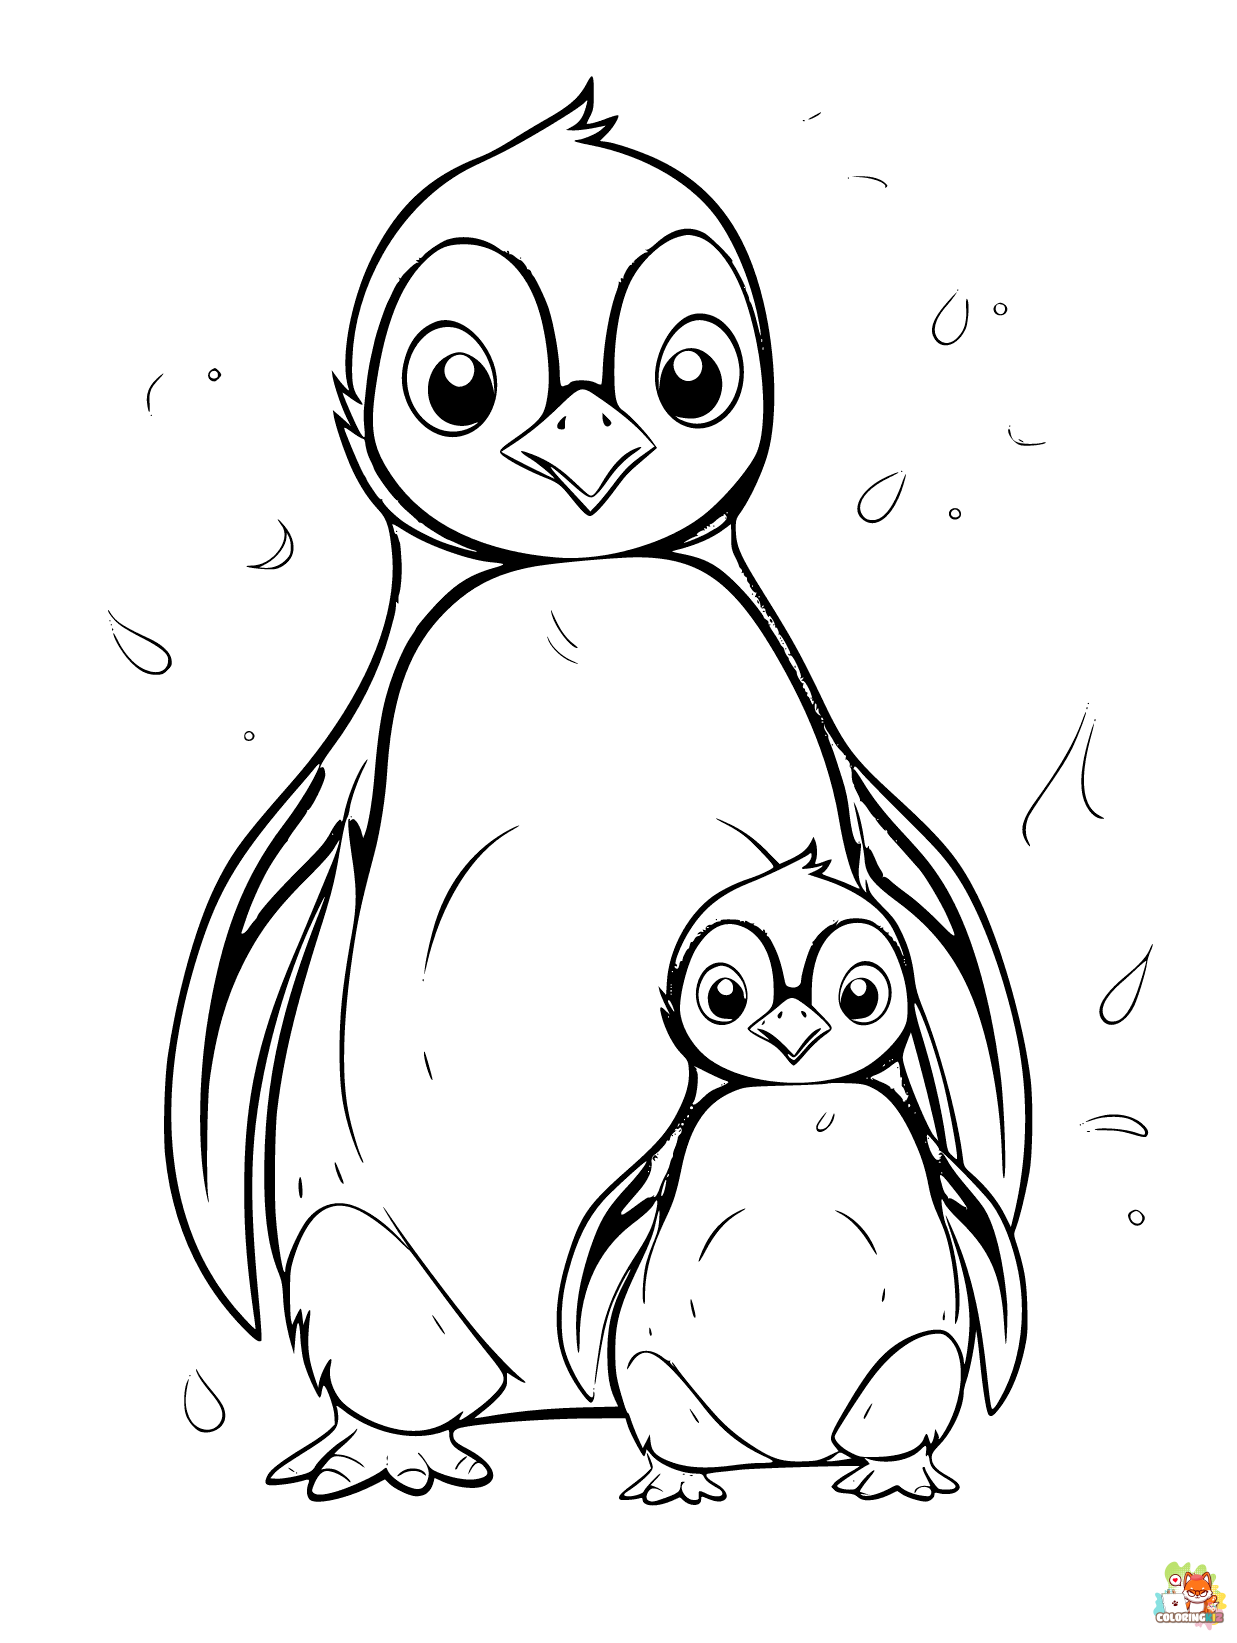 Printable Penguin coloring sheets